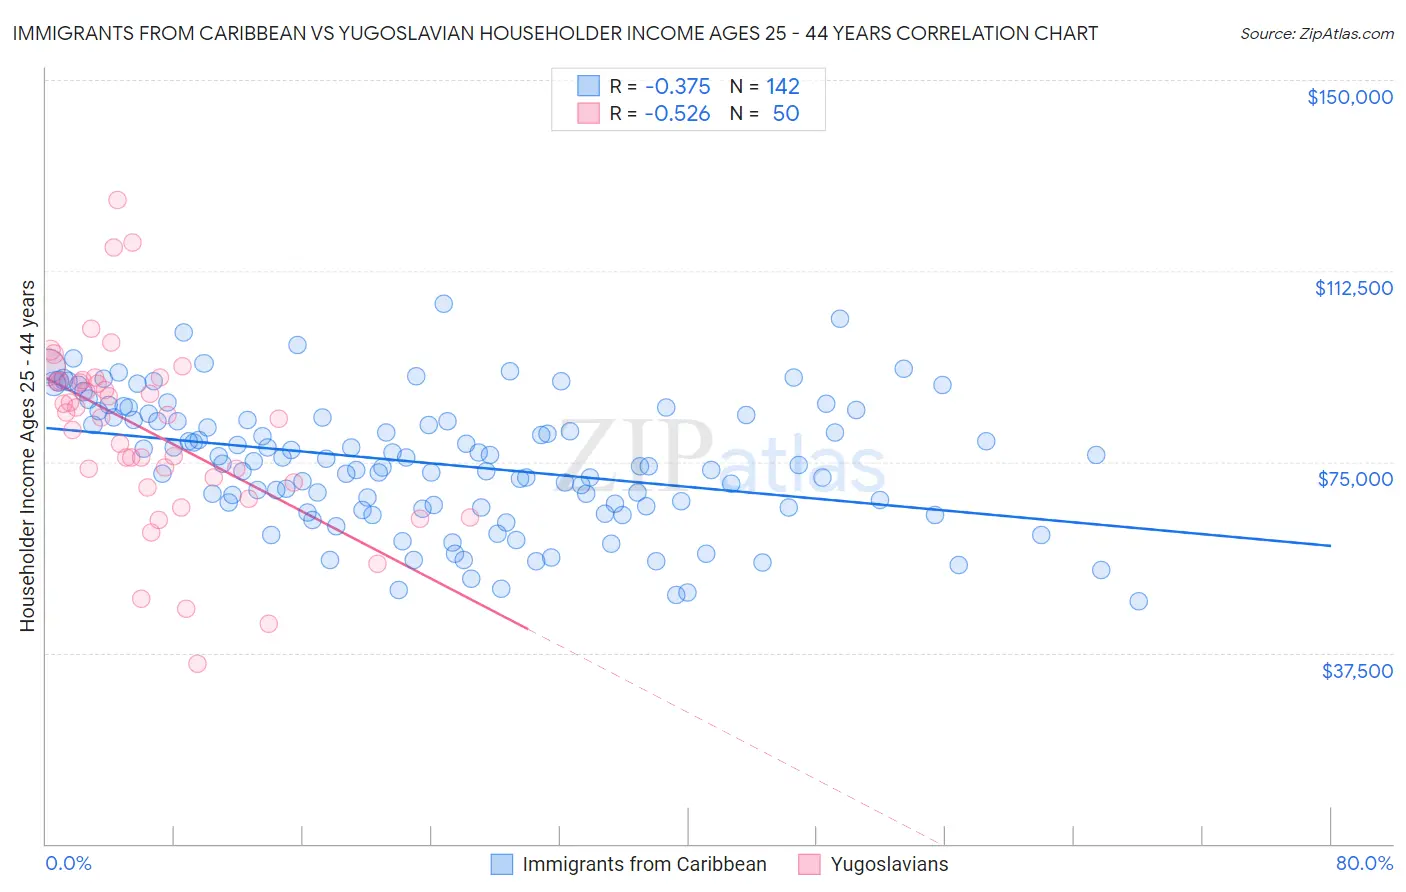 Immigrants from Caribbean vs Yugoslavian Householder Income Ages 25 - 44 years